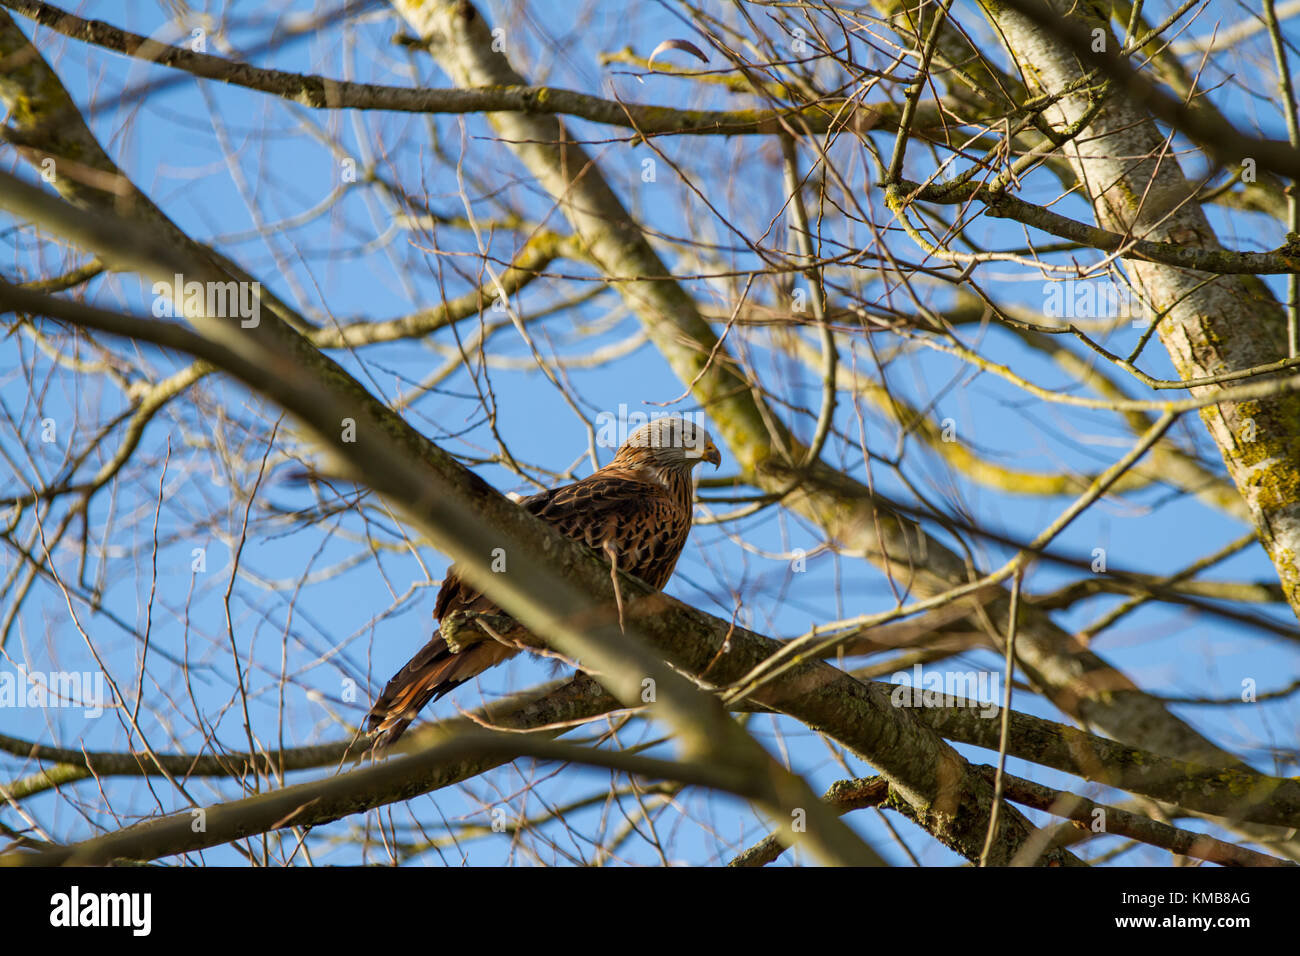 A Red Kite (Milvus milvus) perched in a tree Stock Photo